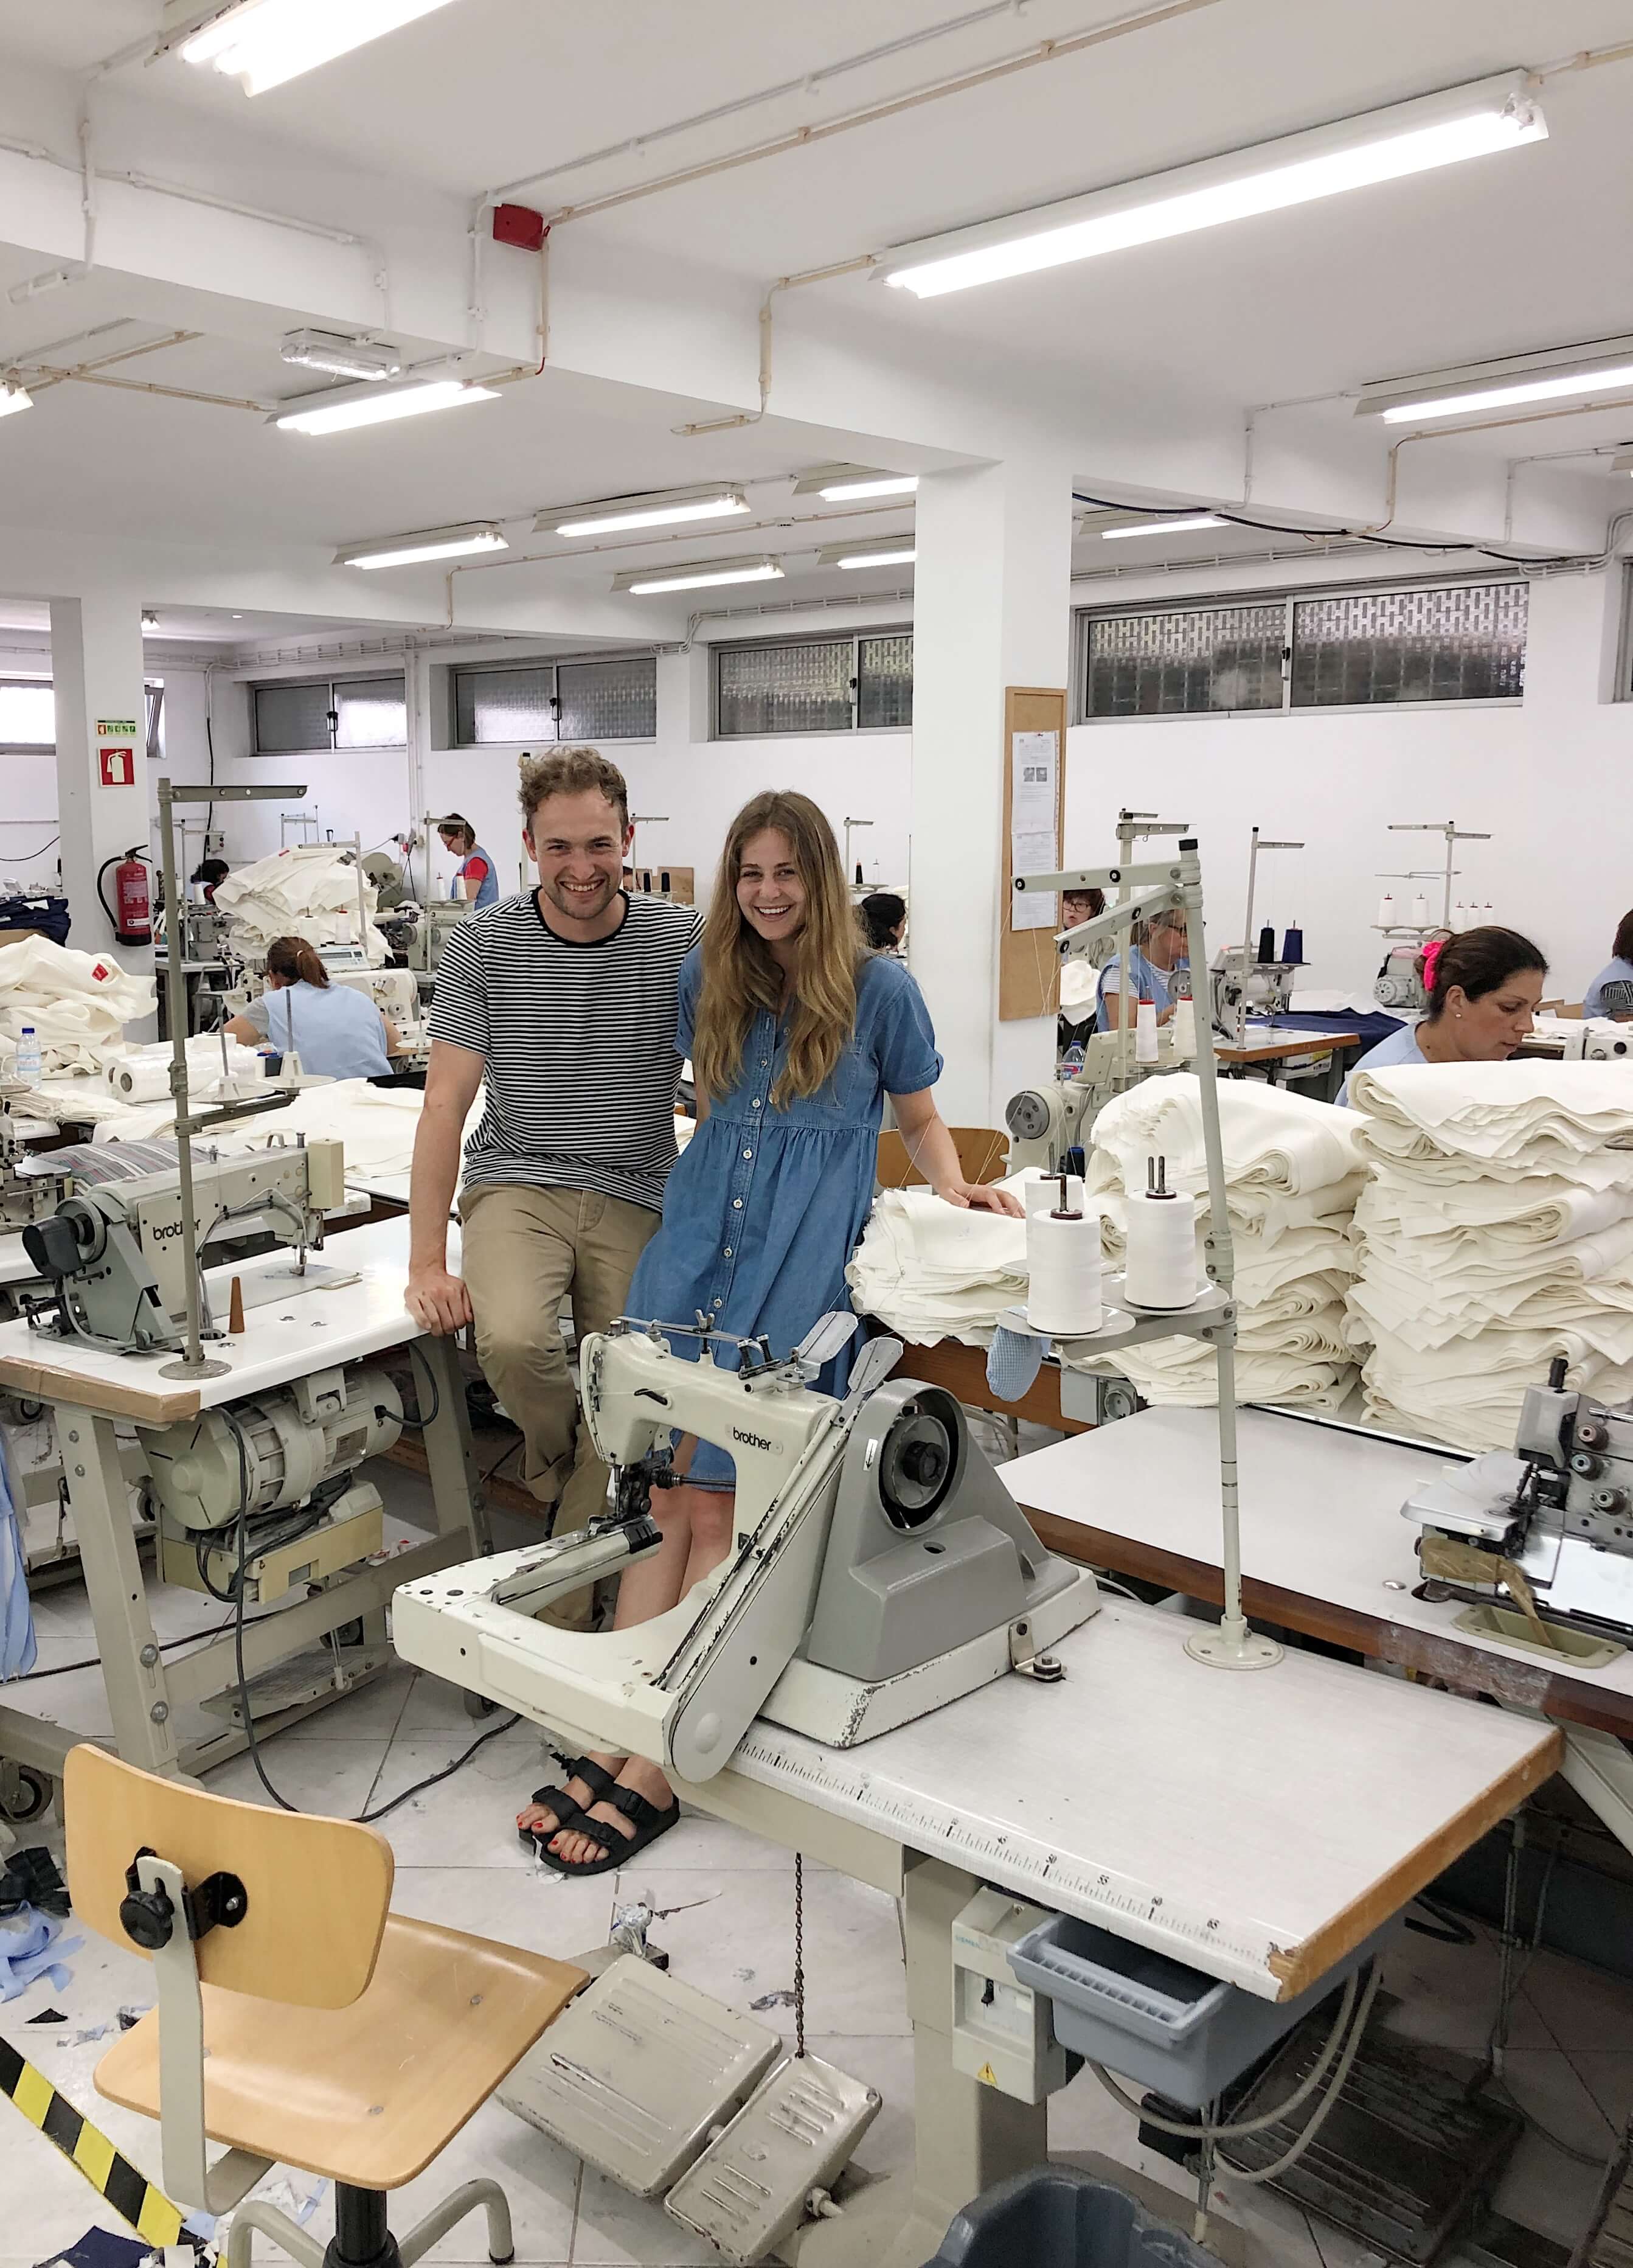 Huw and Becky standing at a clothing factory among workers sewing clothes